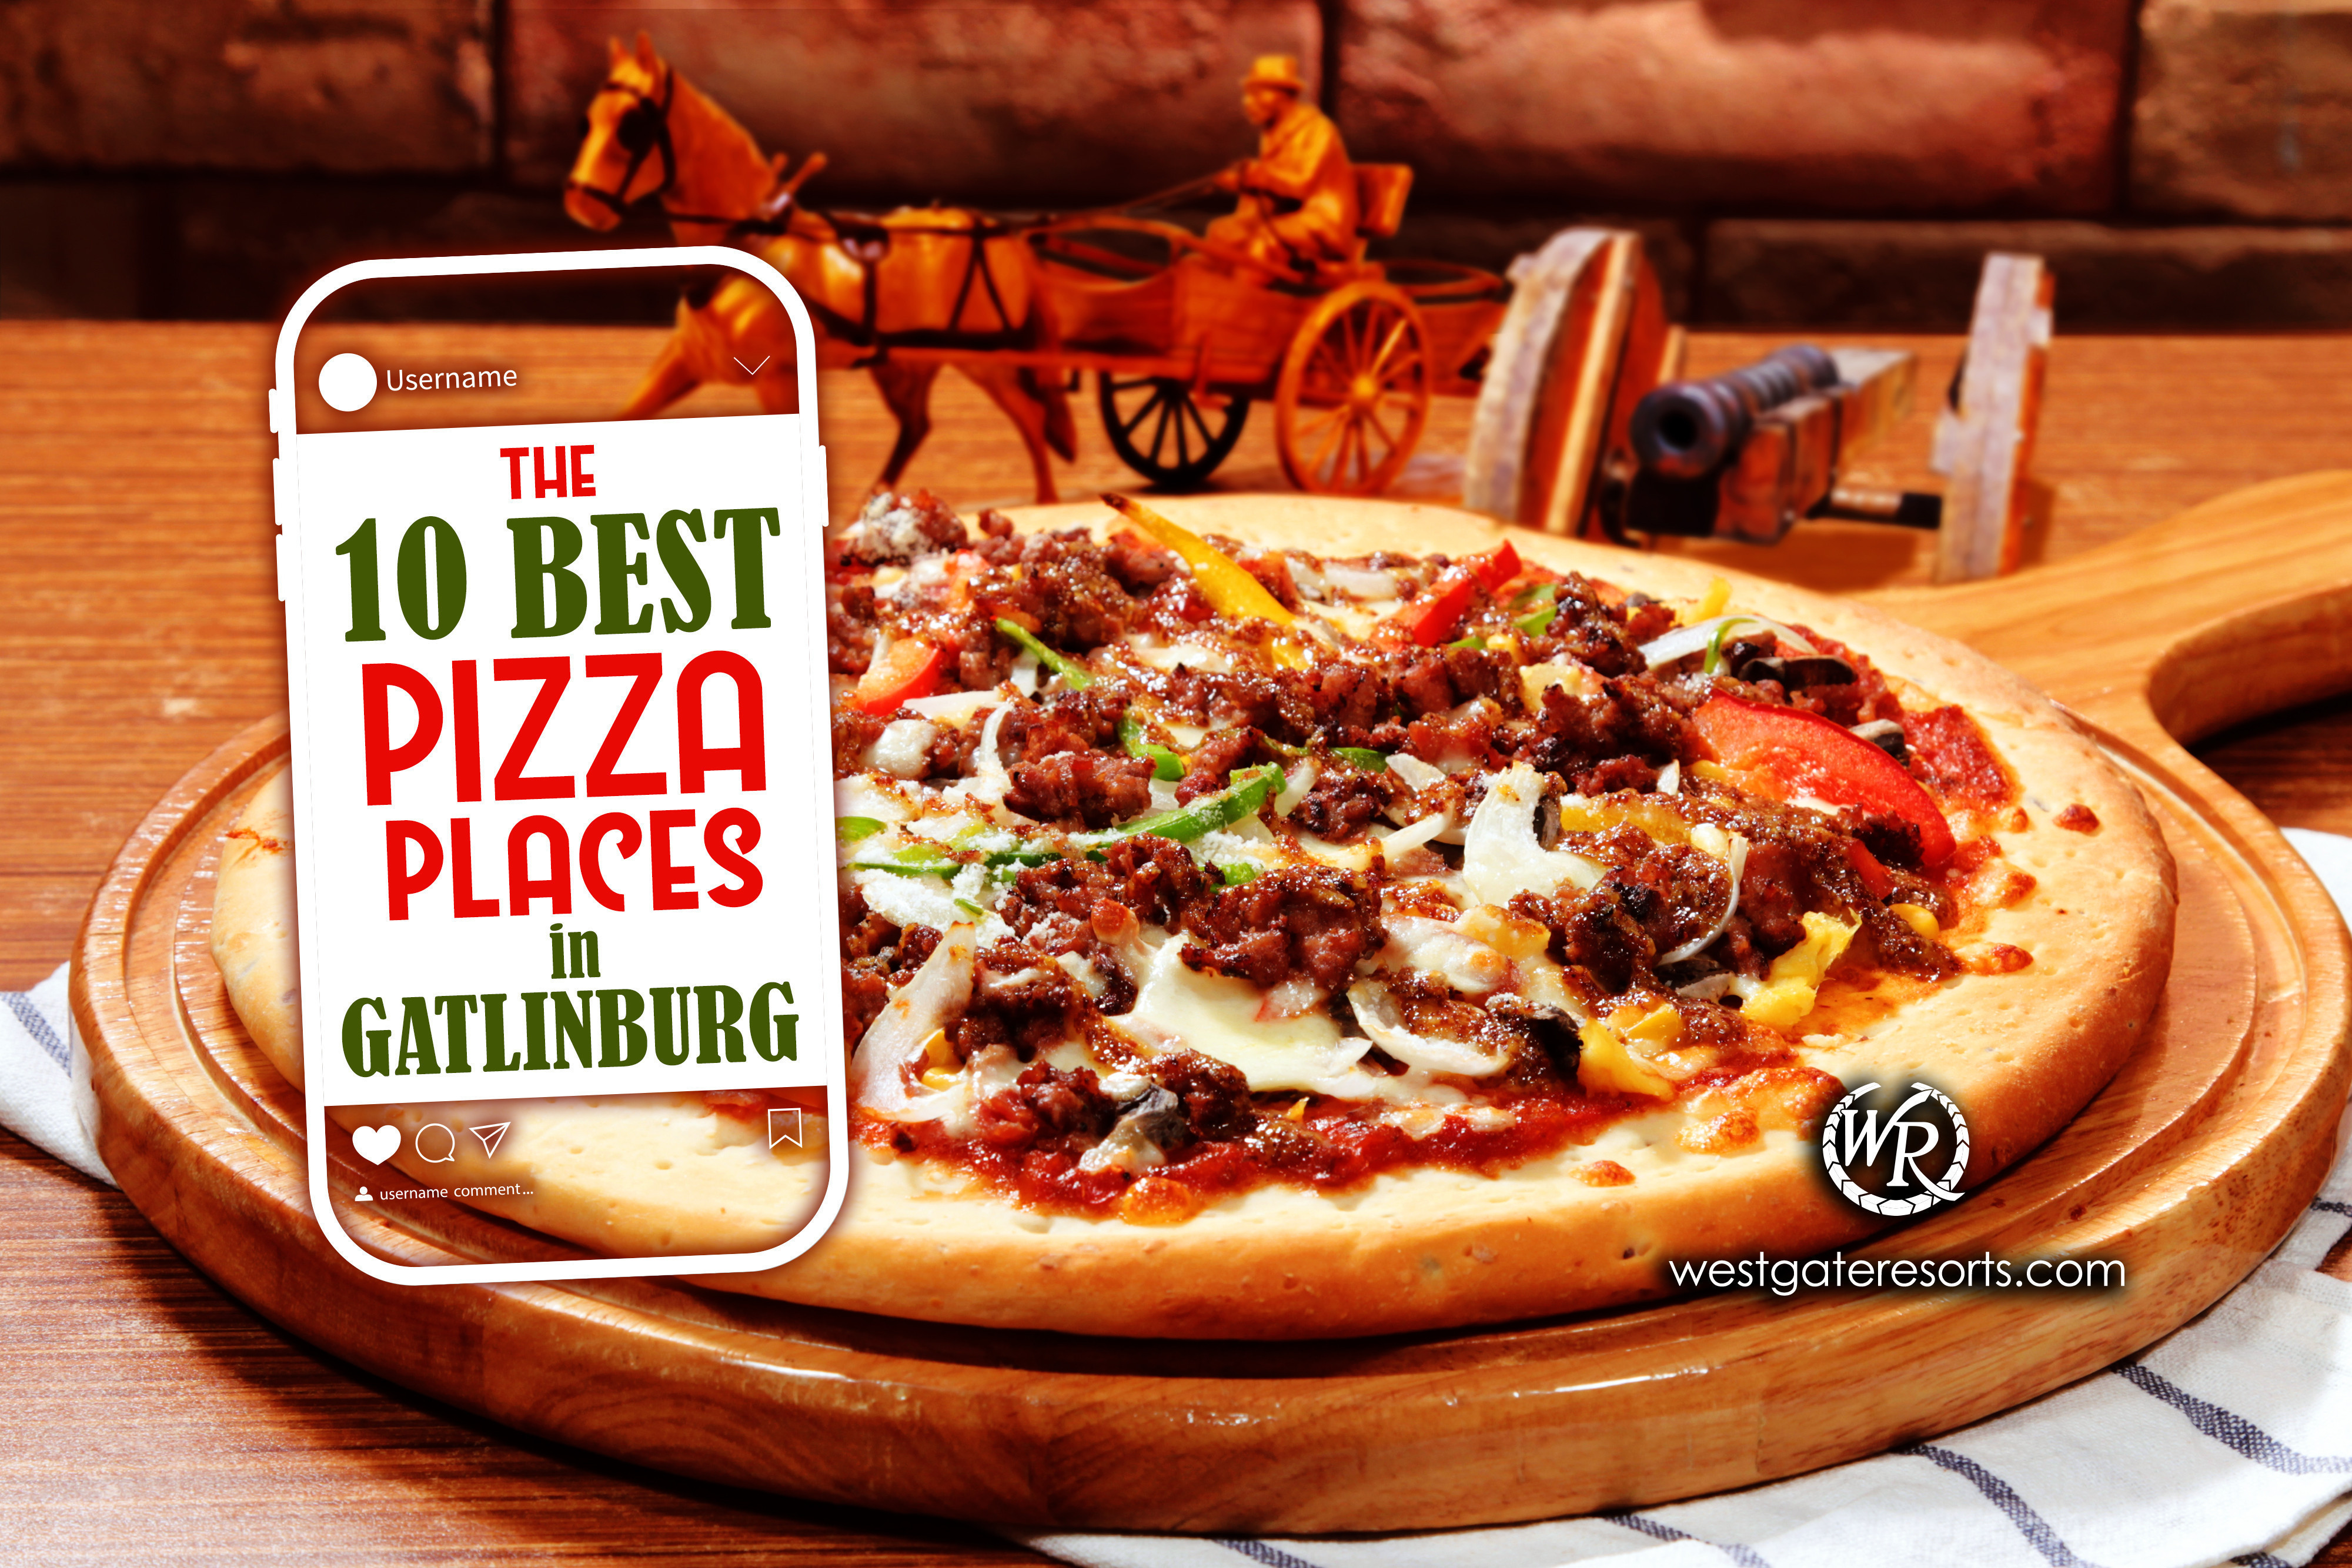 The 10 Best Pizza Places in Gatlinburg to Get Your Slice On!